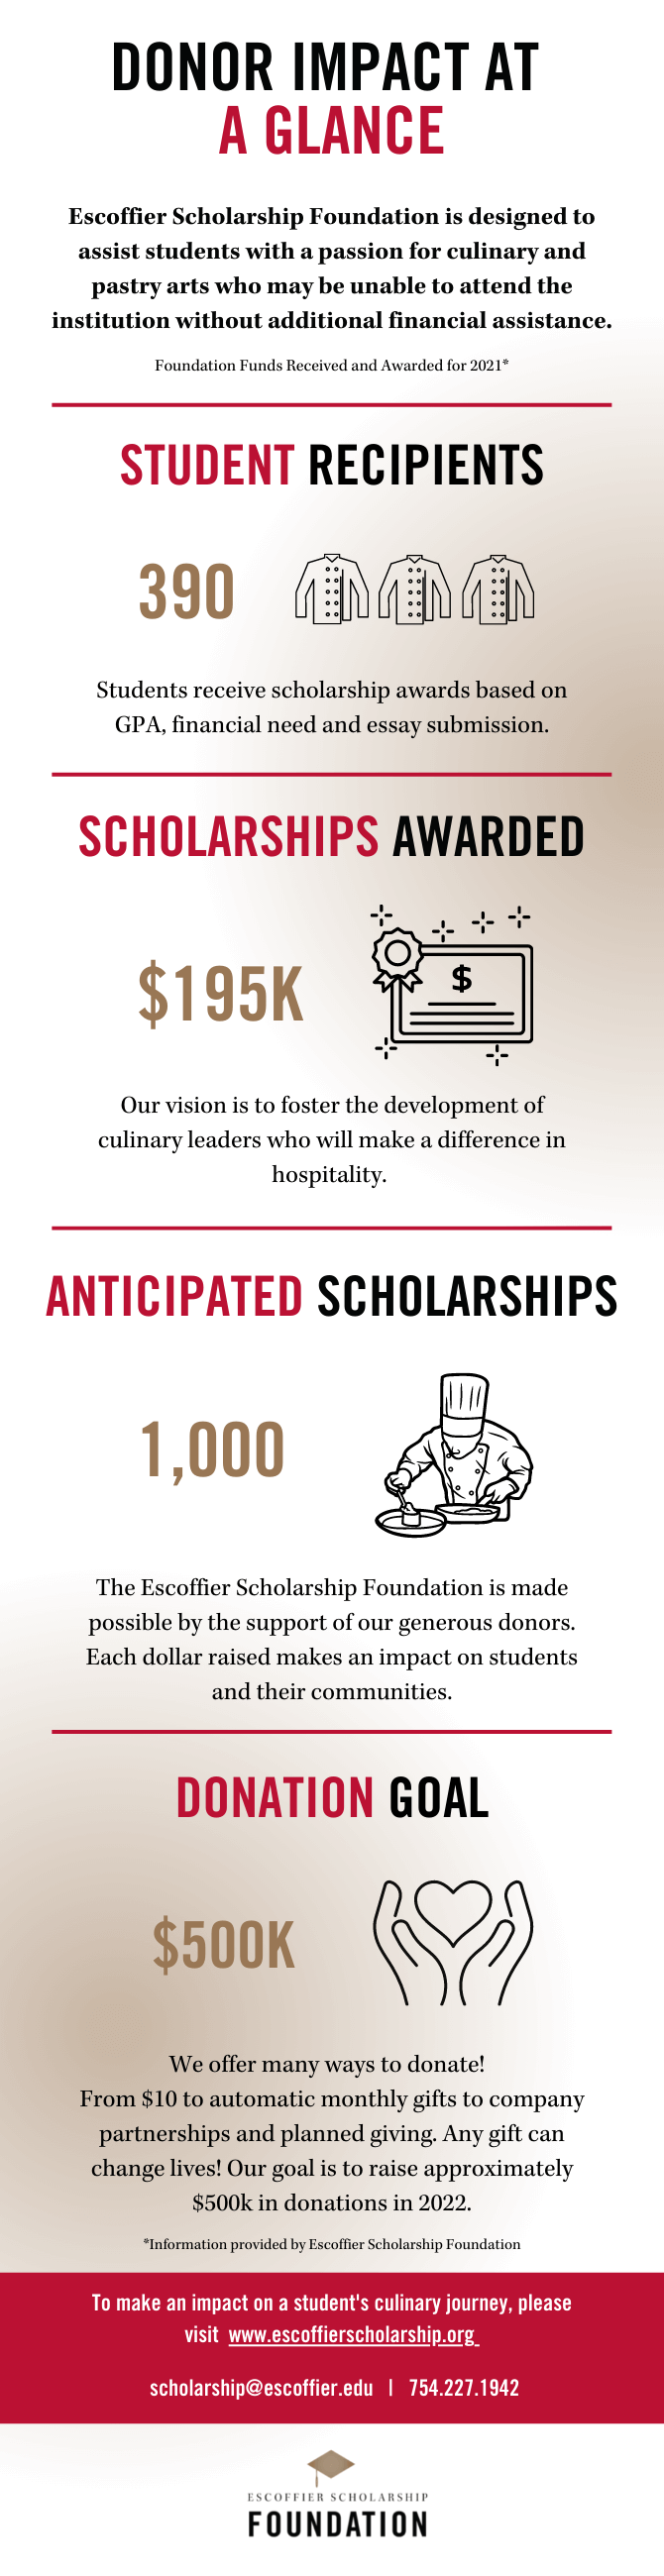 escoffier scholarship foundation donor infographic mobile